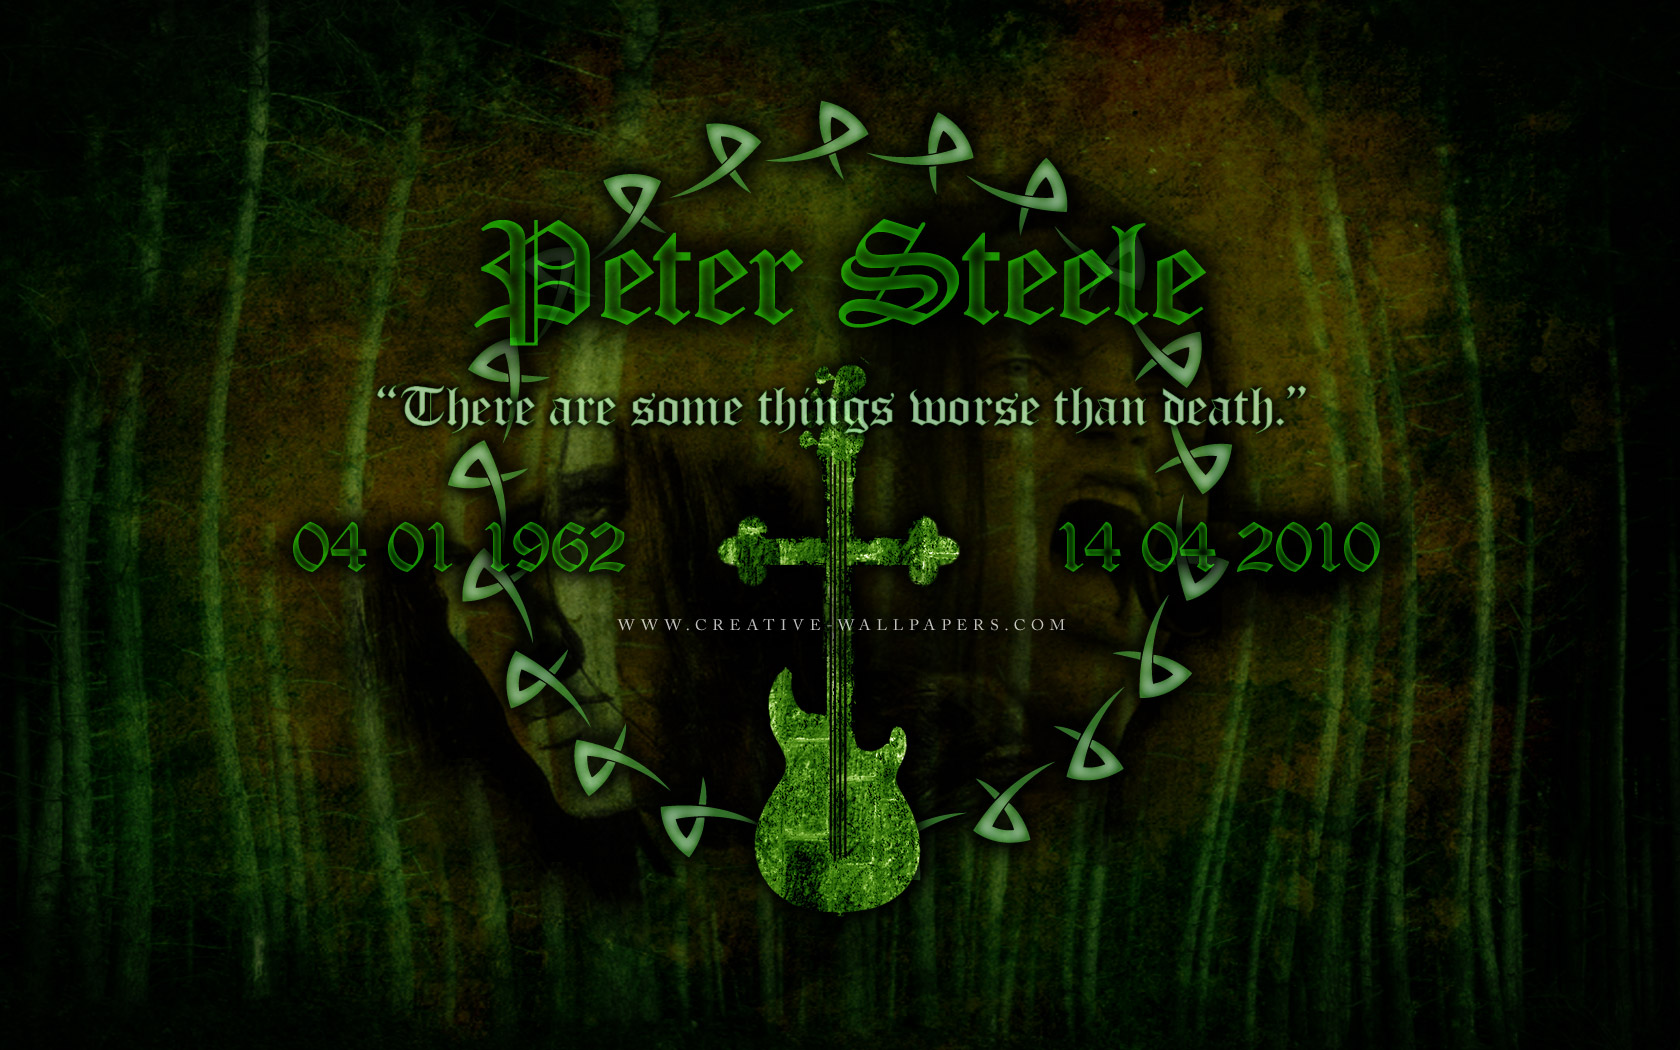 Rip Peter Steele Type O Negative Real